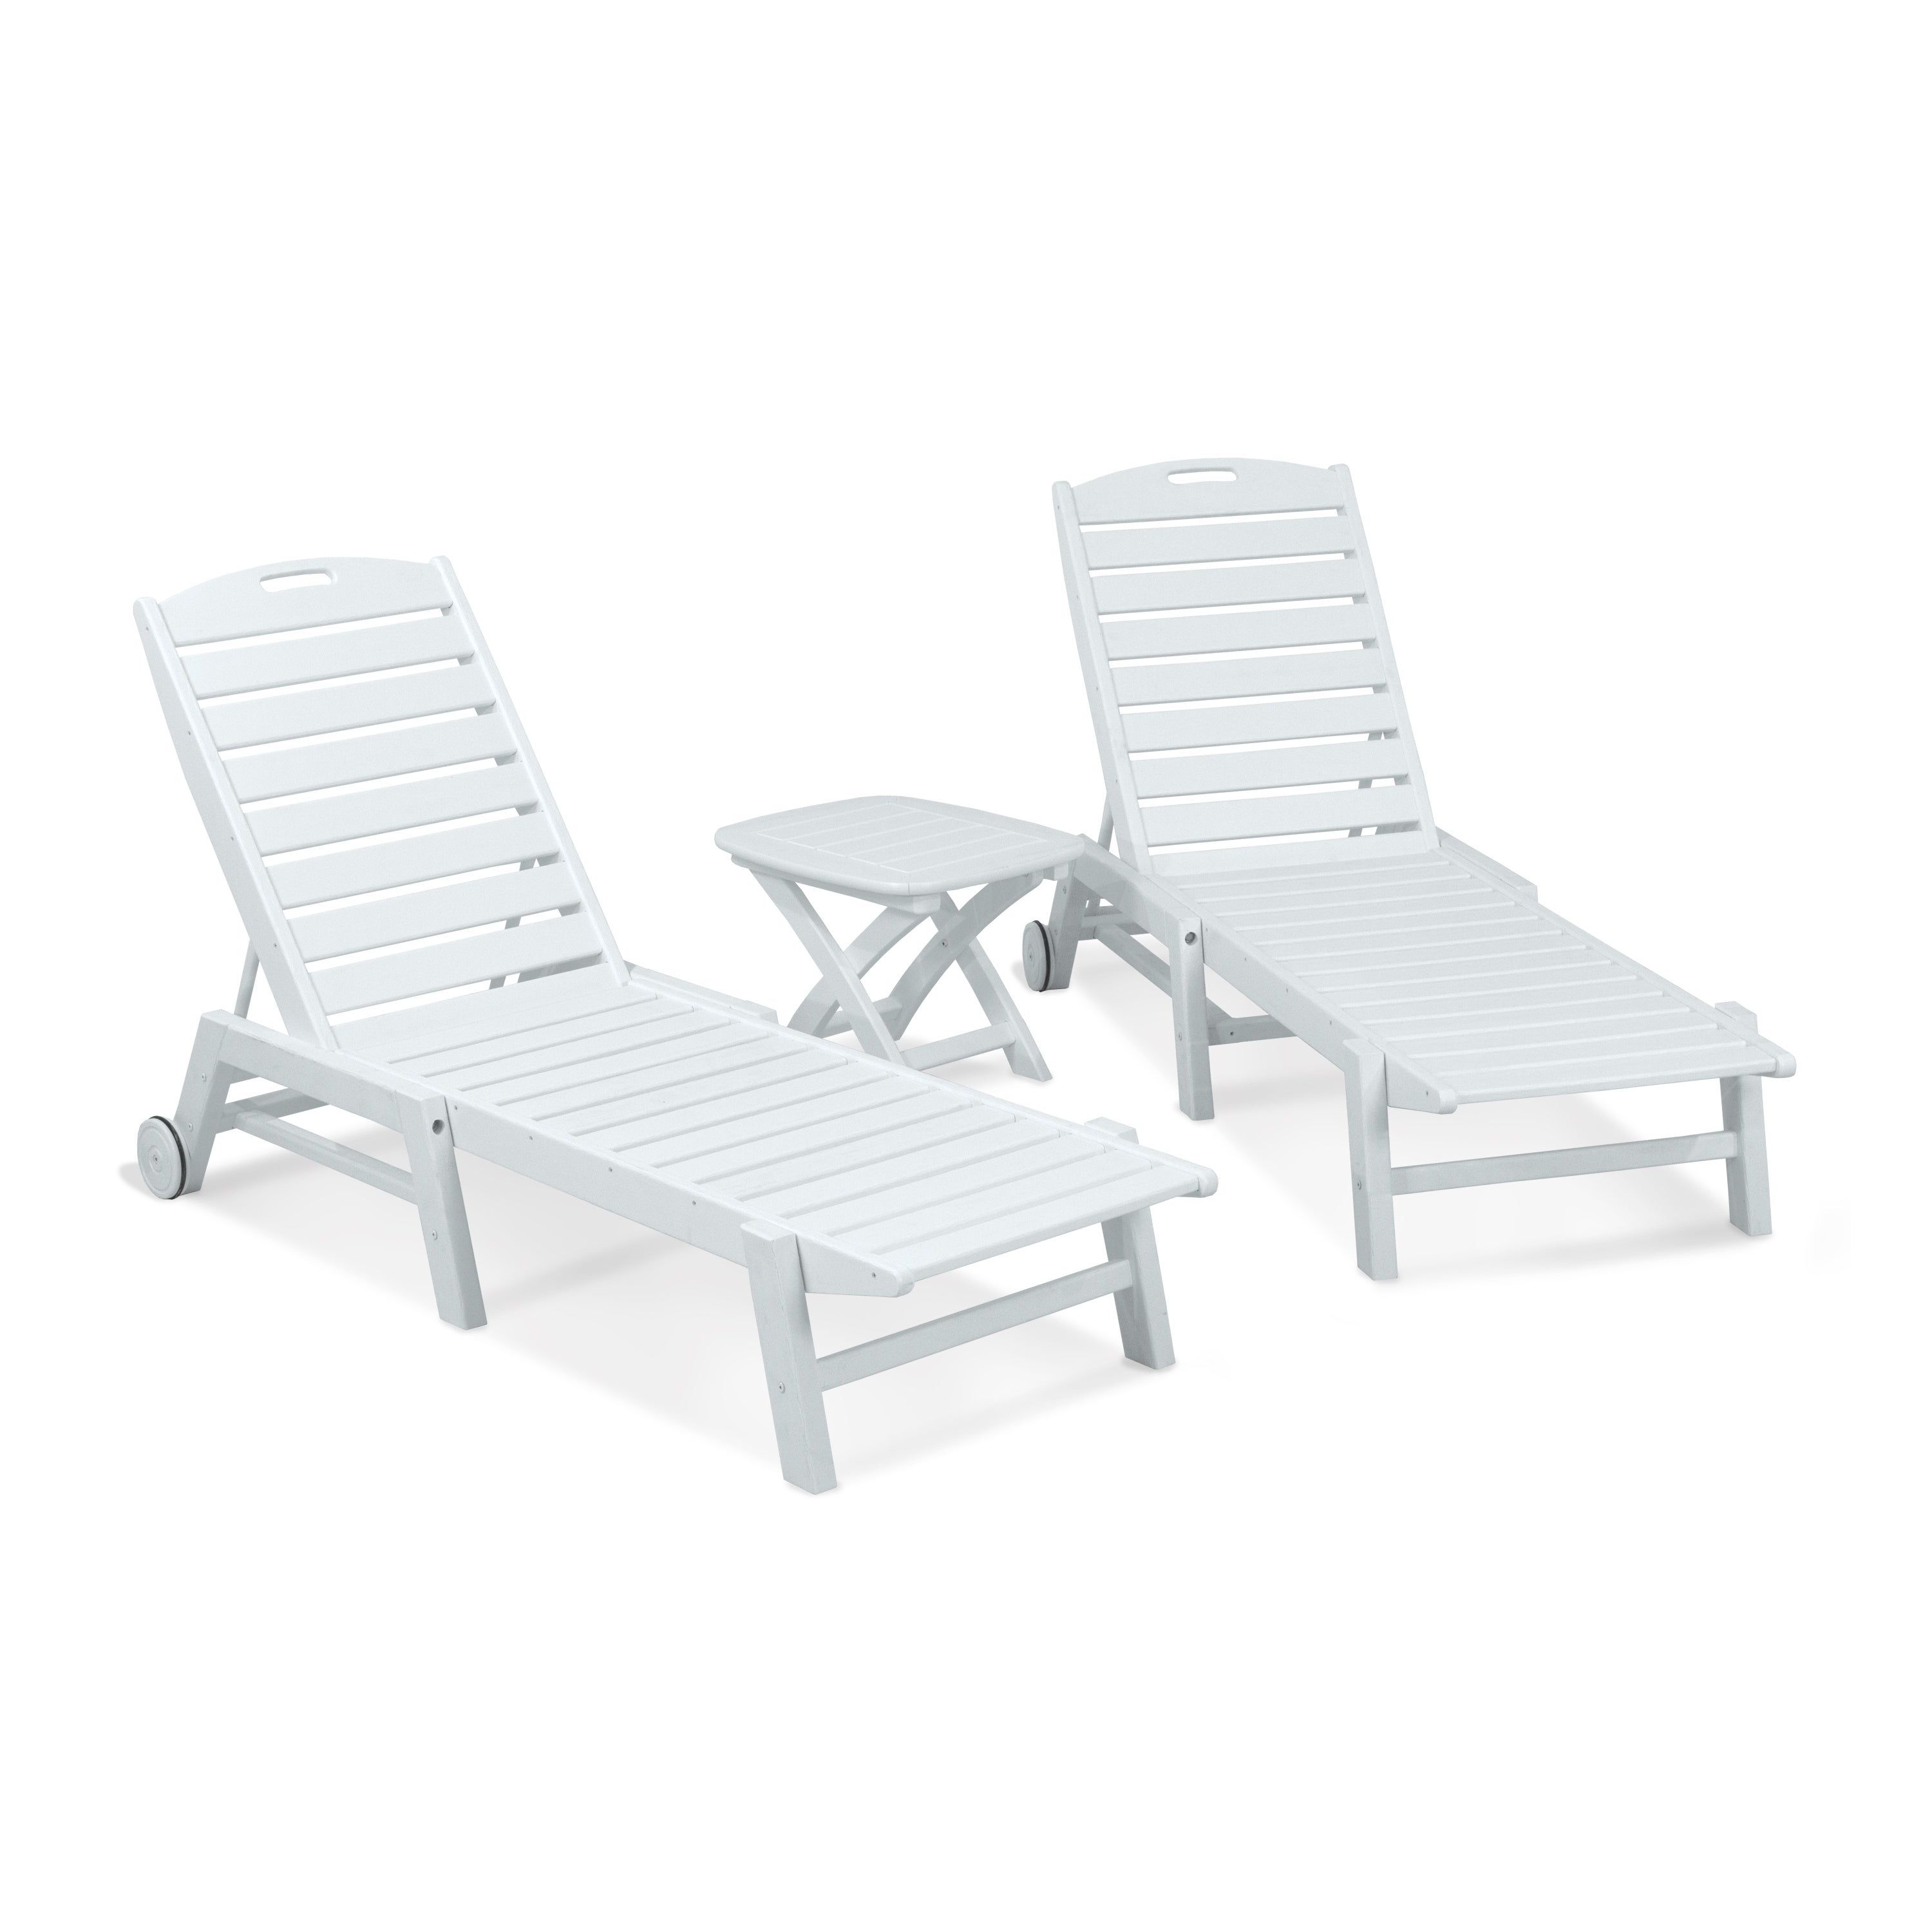 Trendy Polywood® Nautical 3 Piece Outdoor Chaise Lounge Set With Table Within Nautical 3 Piece Outdoor Chaise Lounge Sets With Table (View 4 of 25)